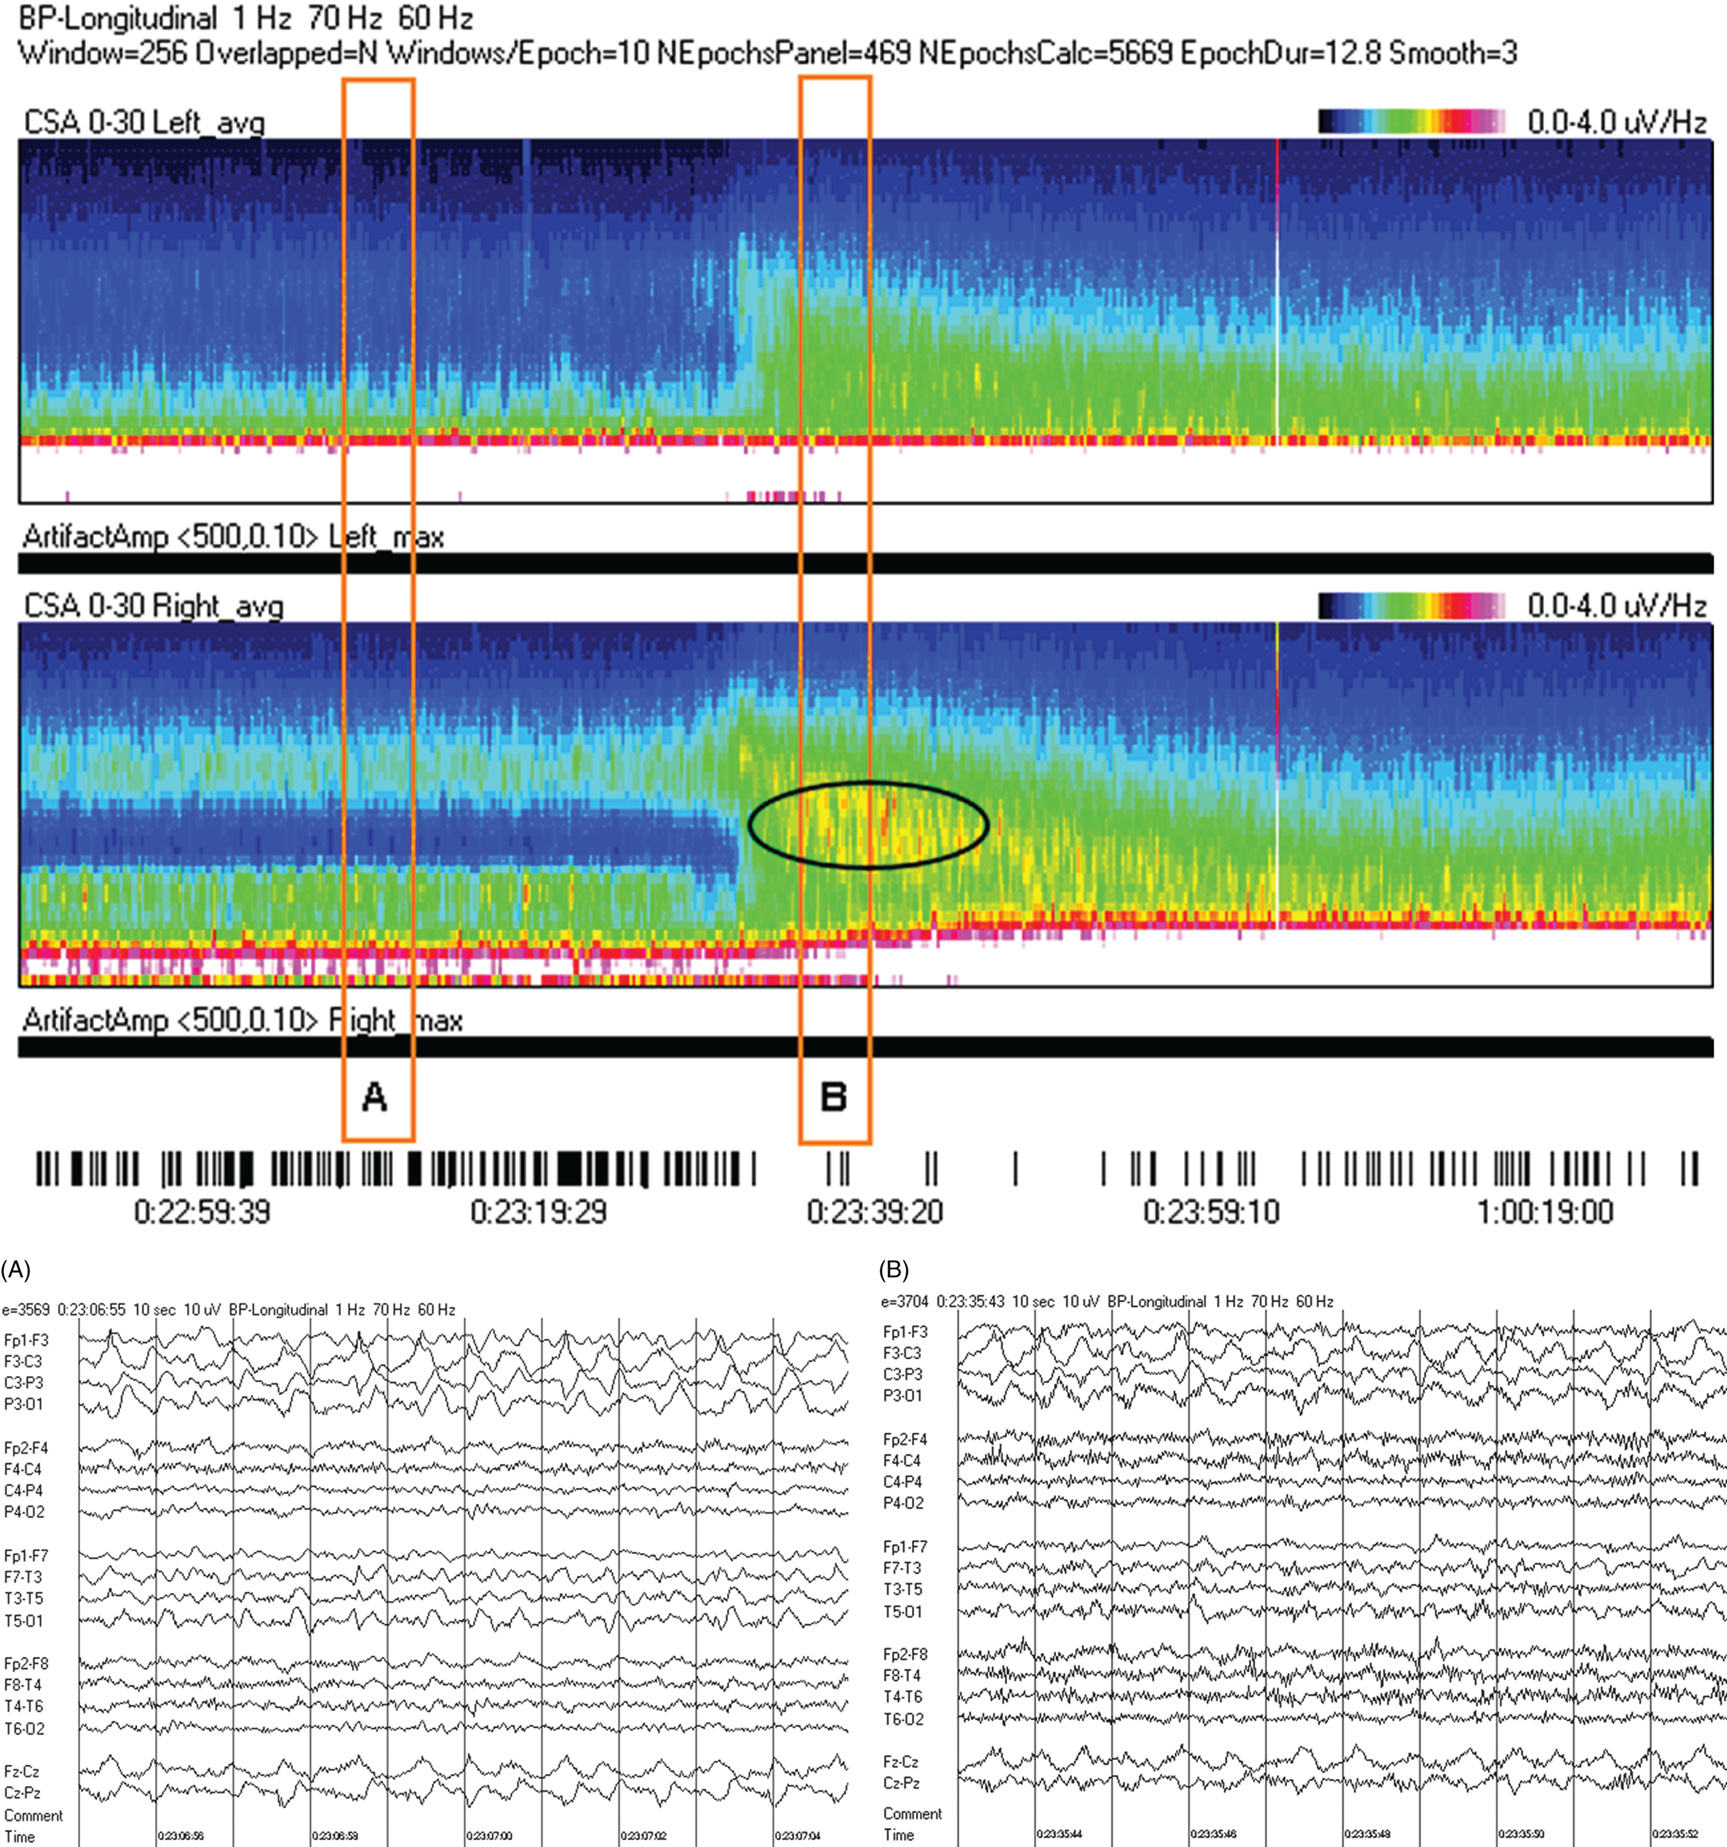 Schematic illustration of spectrogram basics: drug-induced beta and asymmetry. Schematic illustration of At the beginning of the record there is a clear asymmetry with slowing (more delta power) and attenuation (less power in alpha/beta ranges) on the left (A).